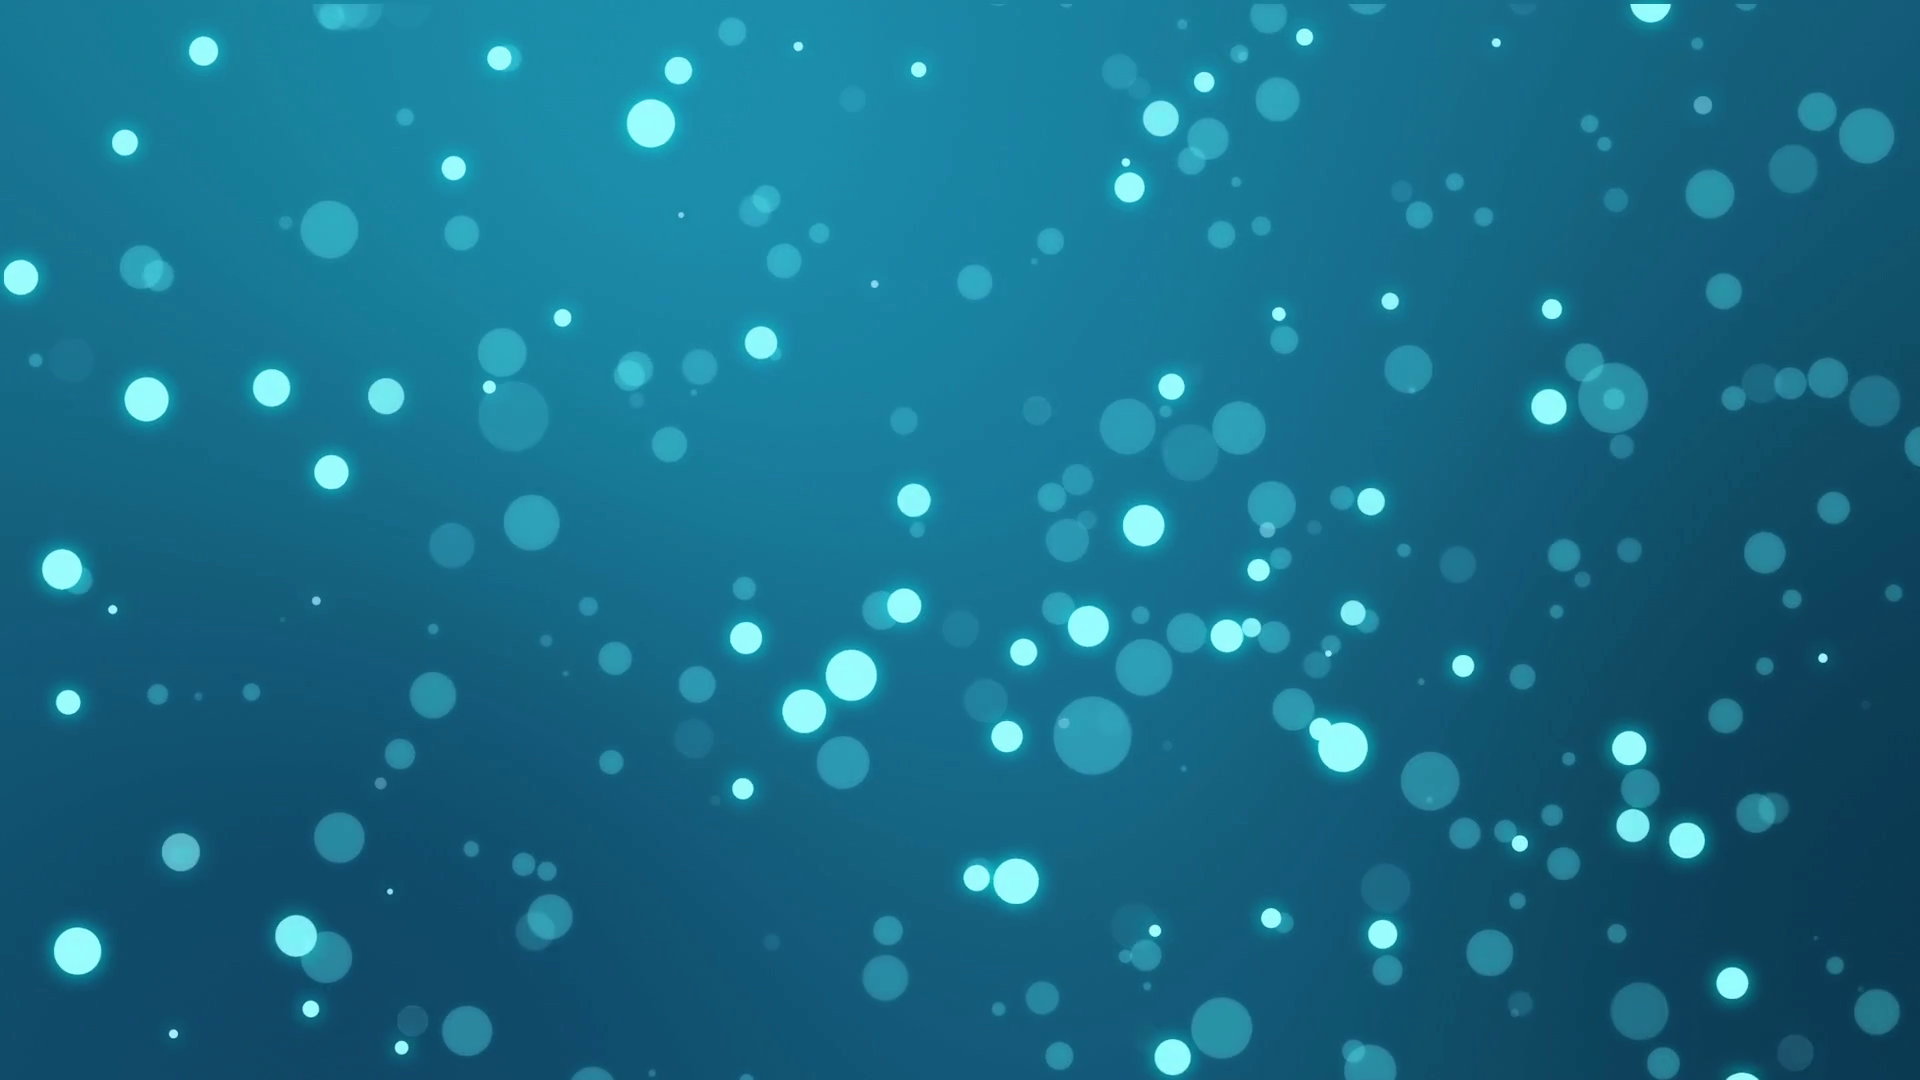 Teal blue bokeh background with floating bubble light particles ...